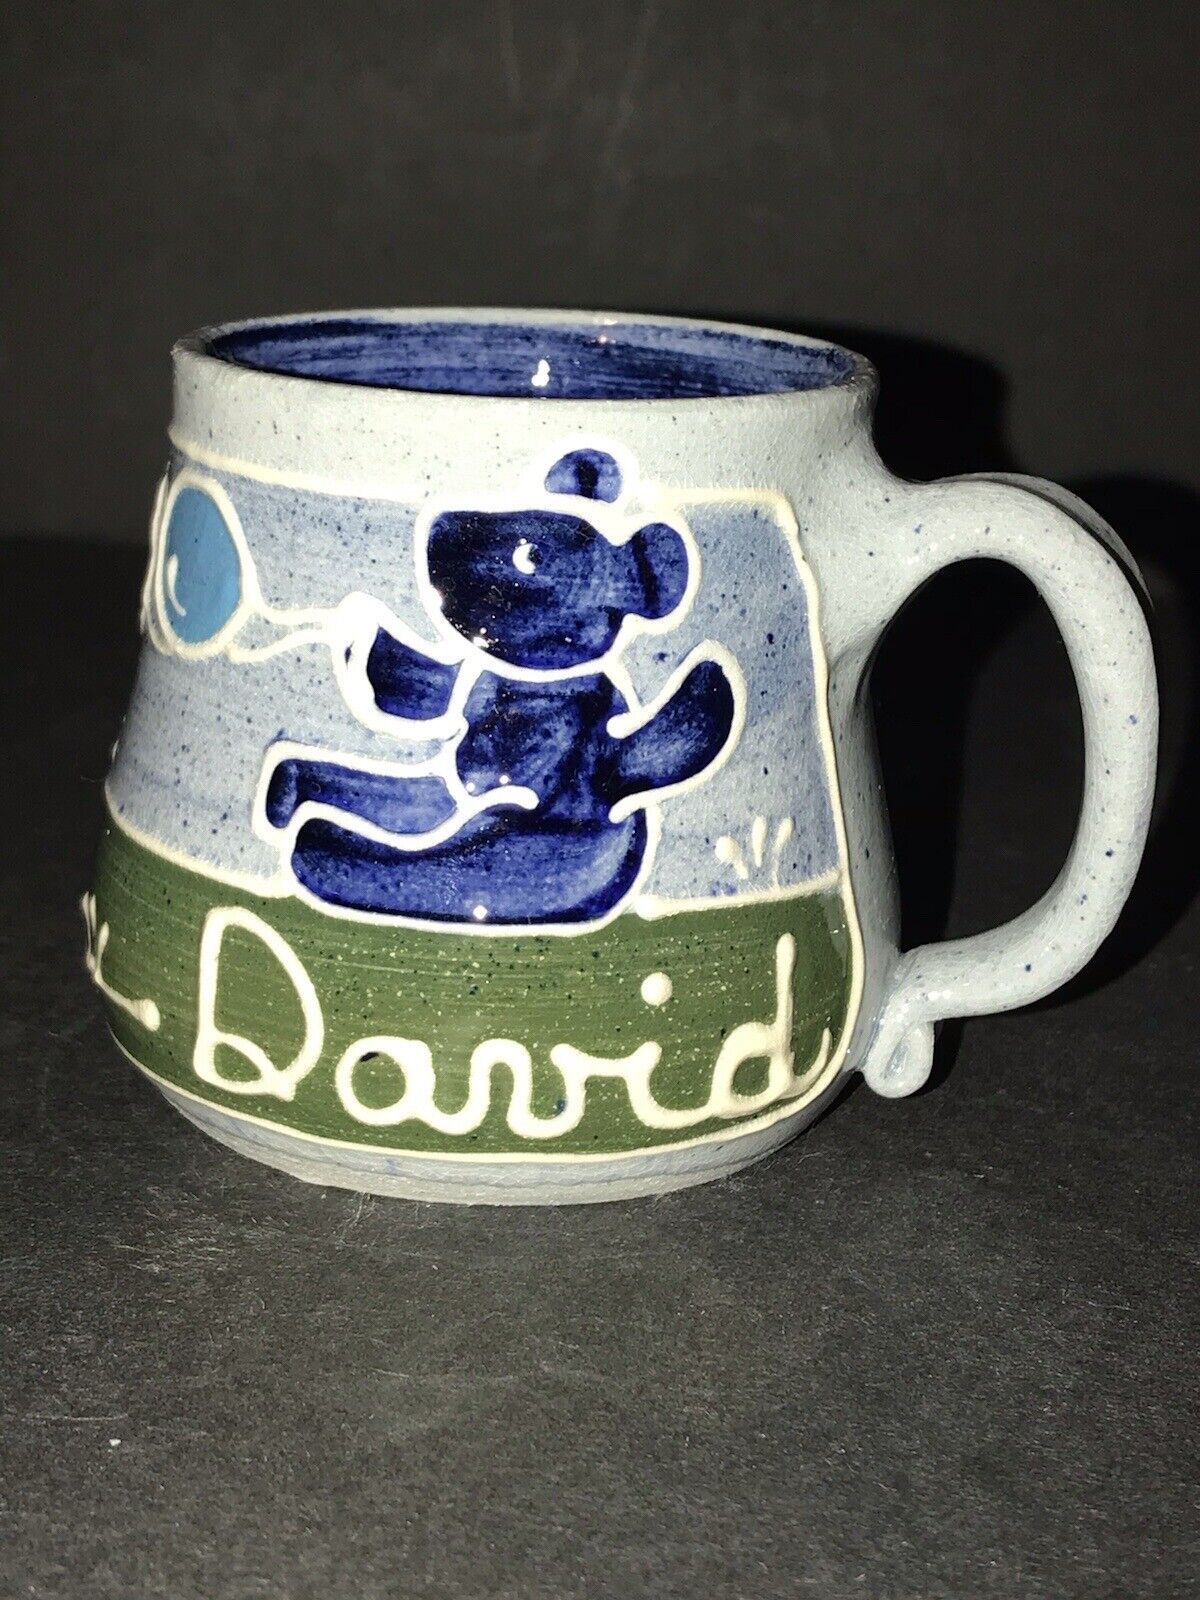 Vintage Small Child’s Mug With Bears/Balloons Personalized With David 8/30/84